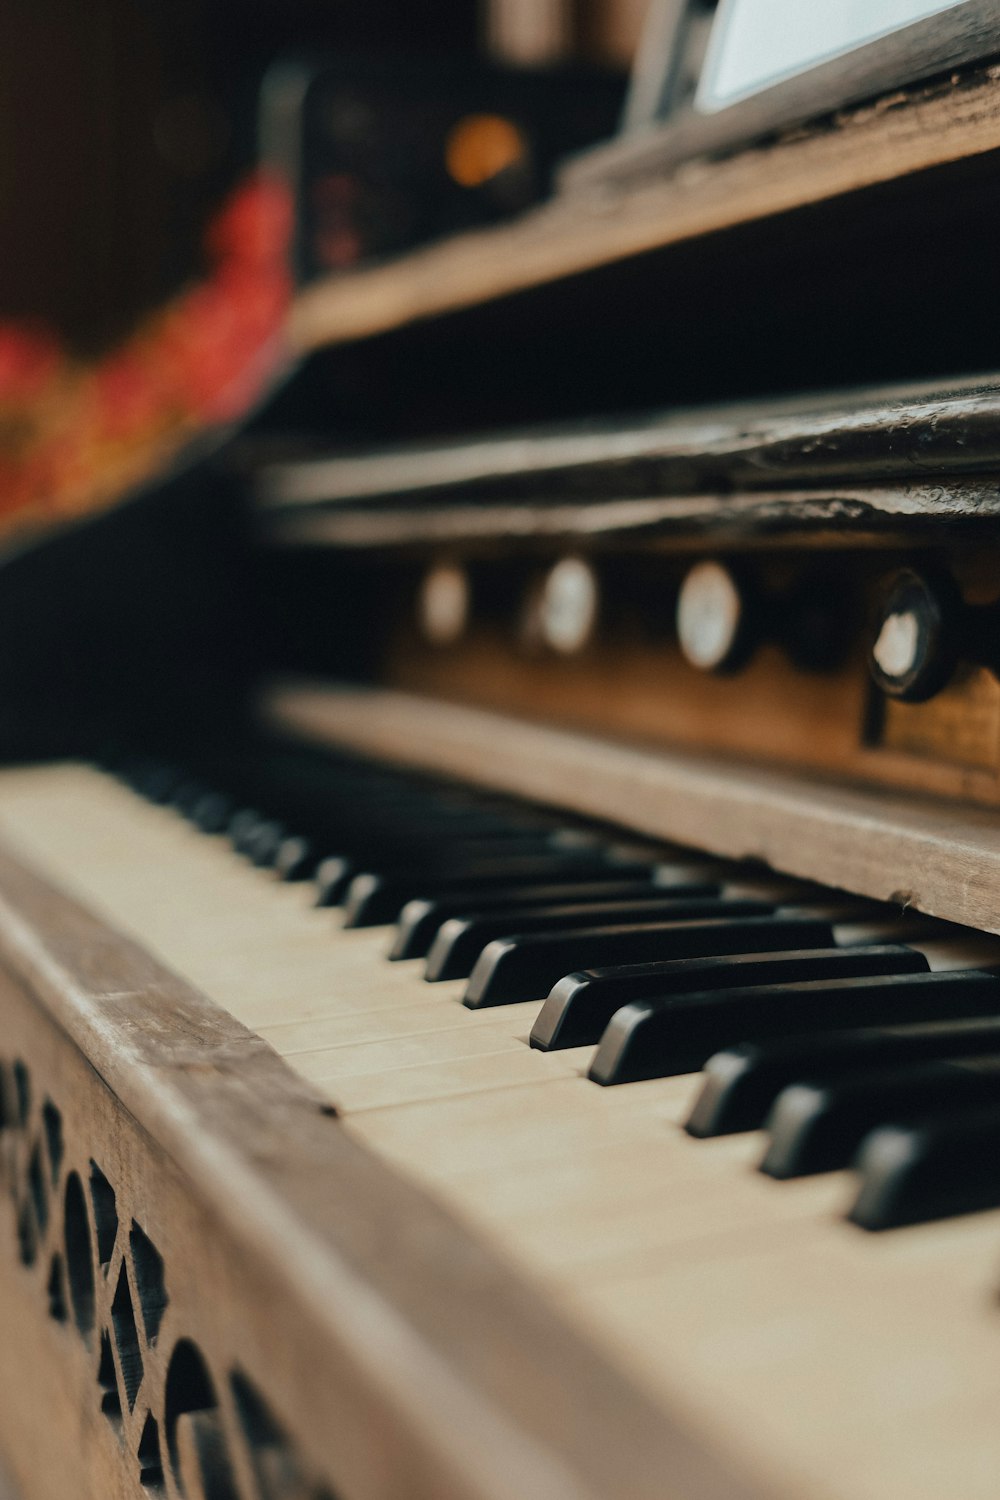 a close up of a piano with a keyboard